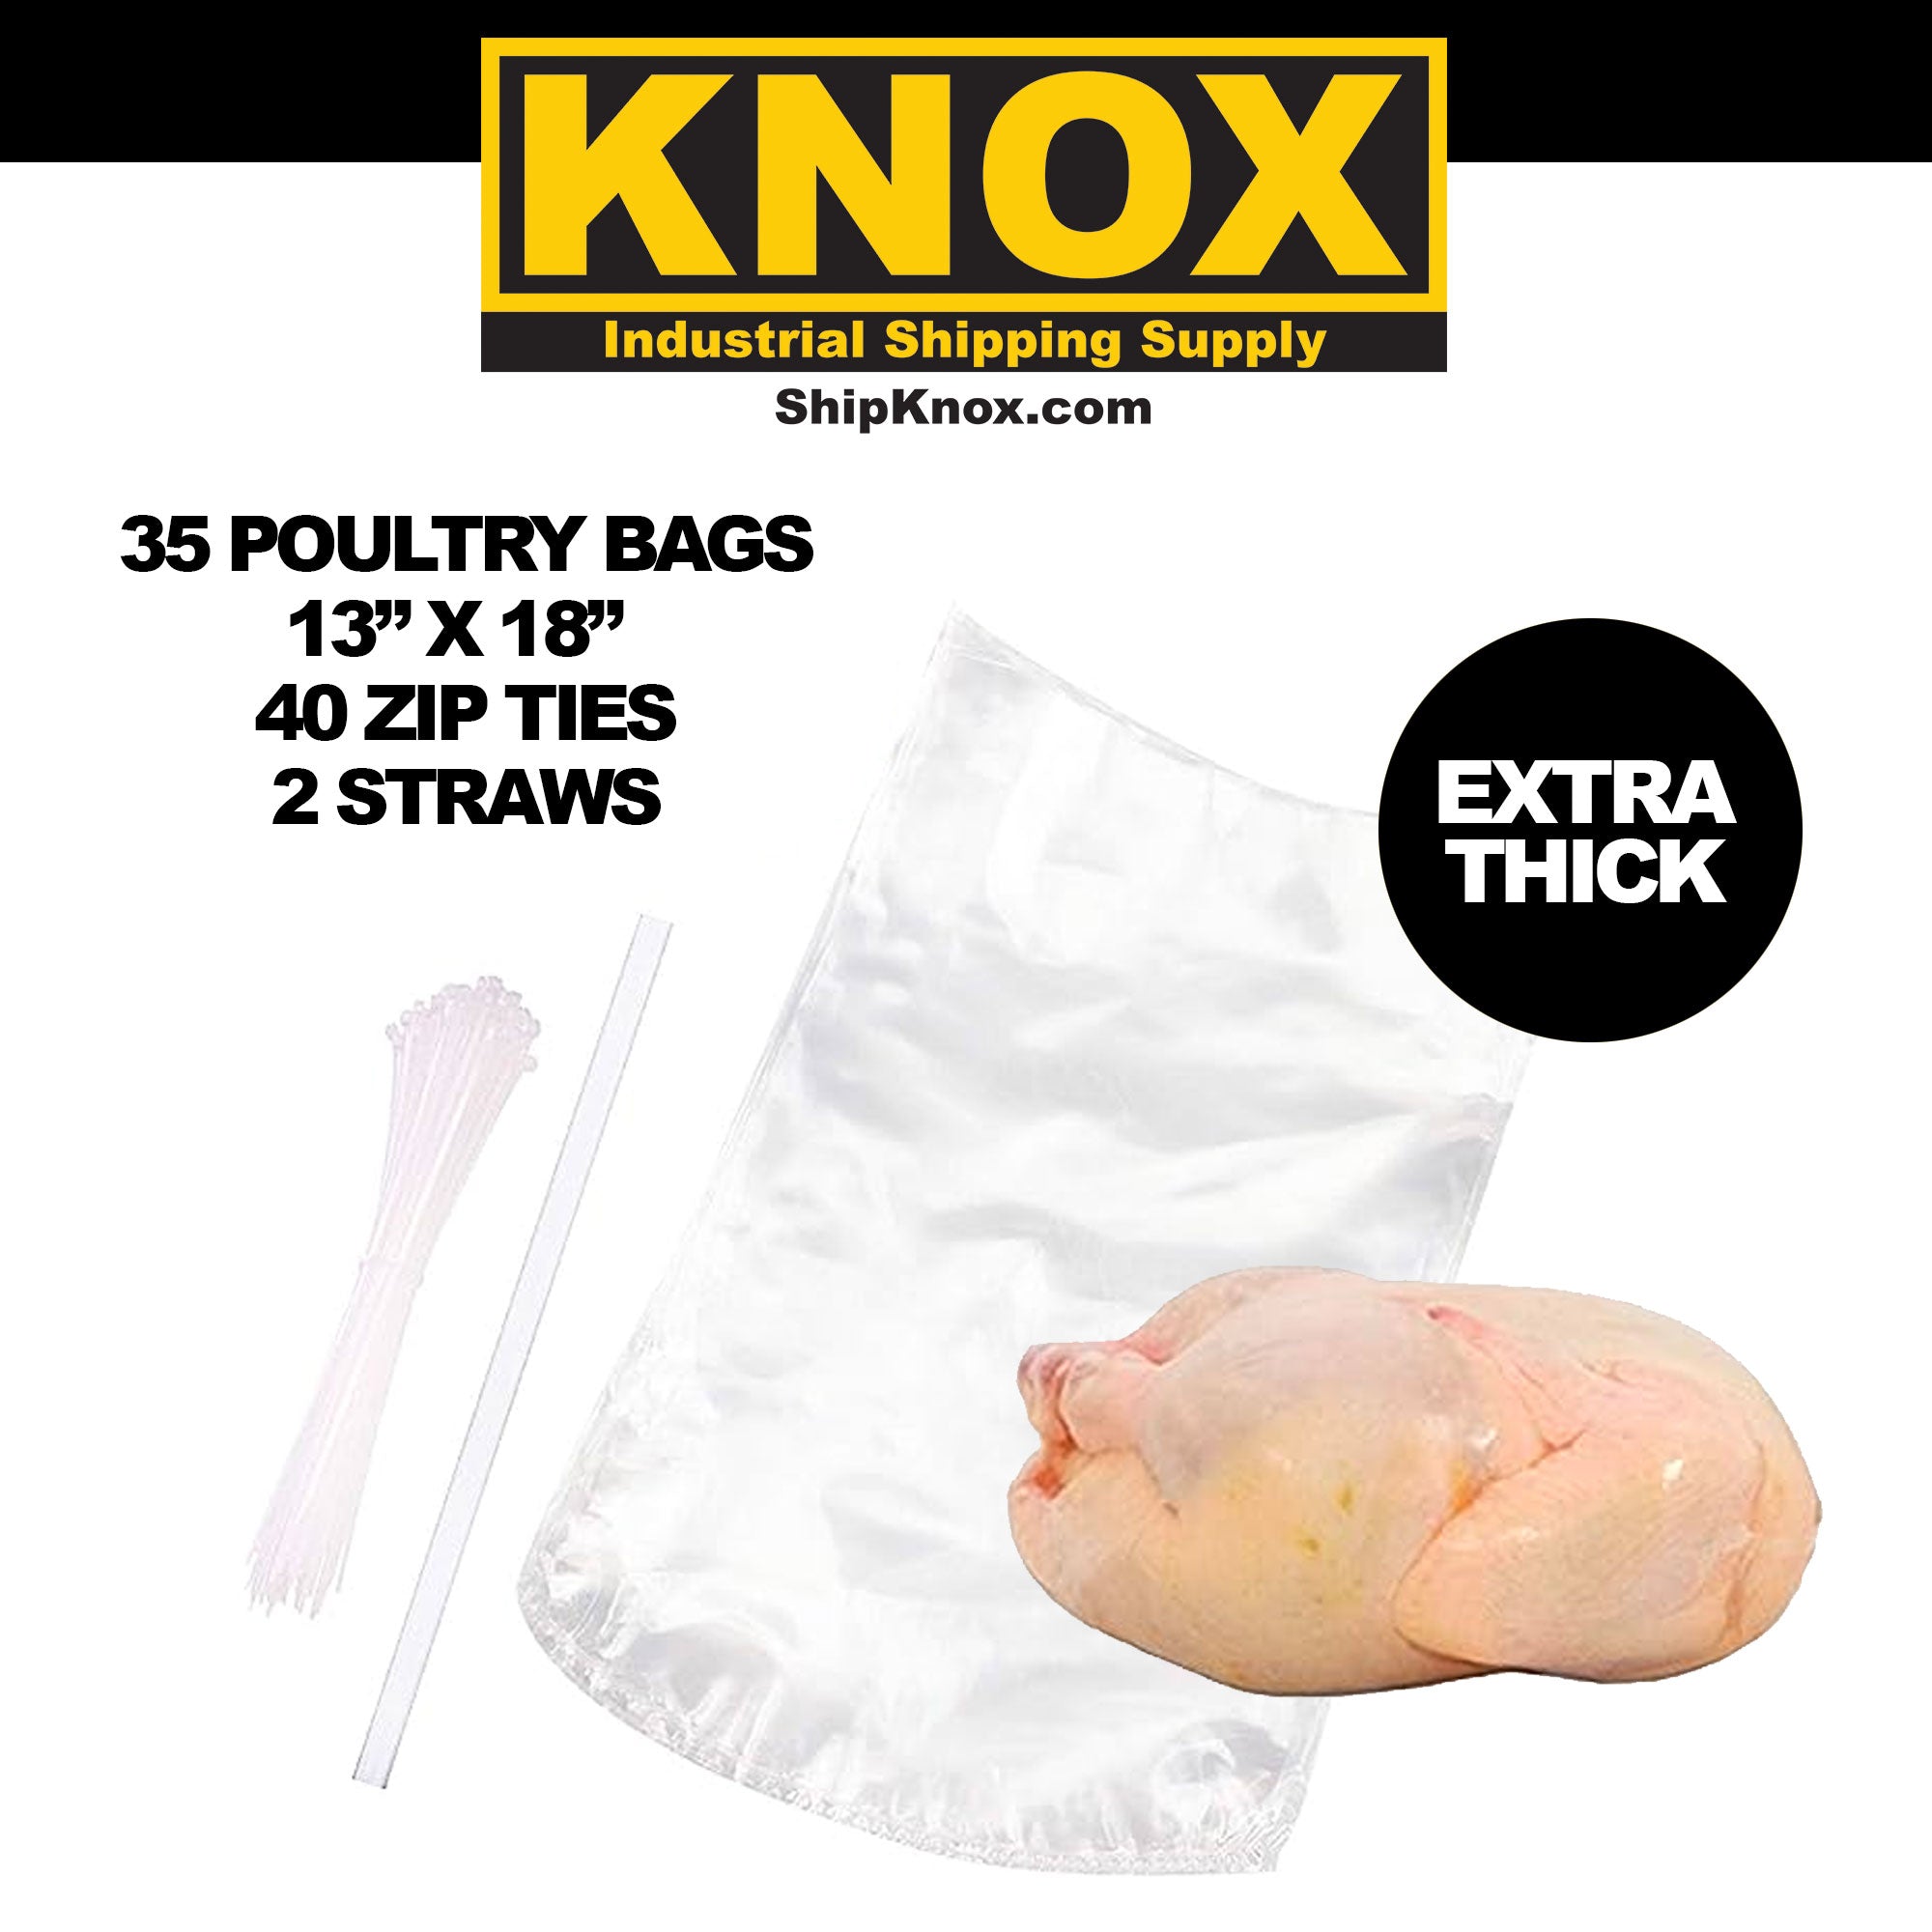 Poultry Shrink Bags